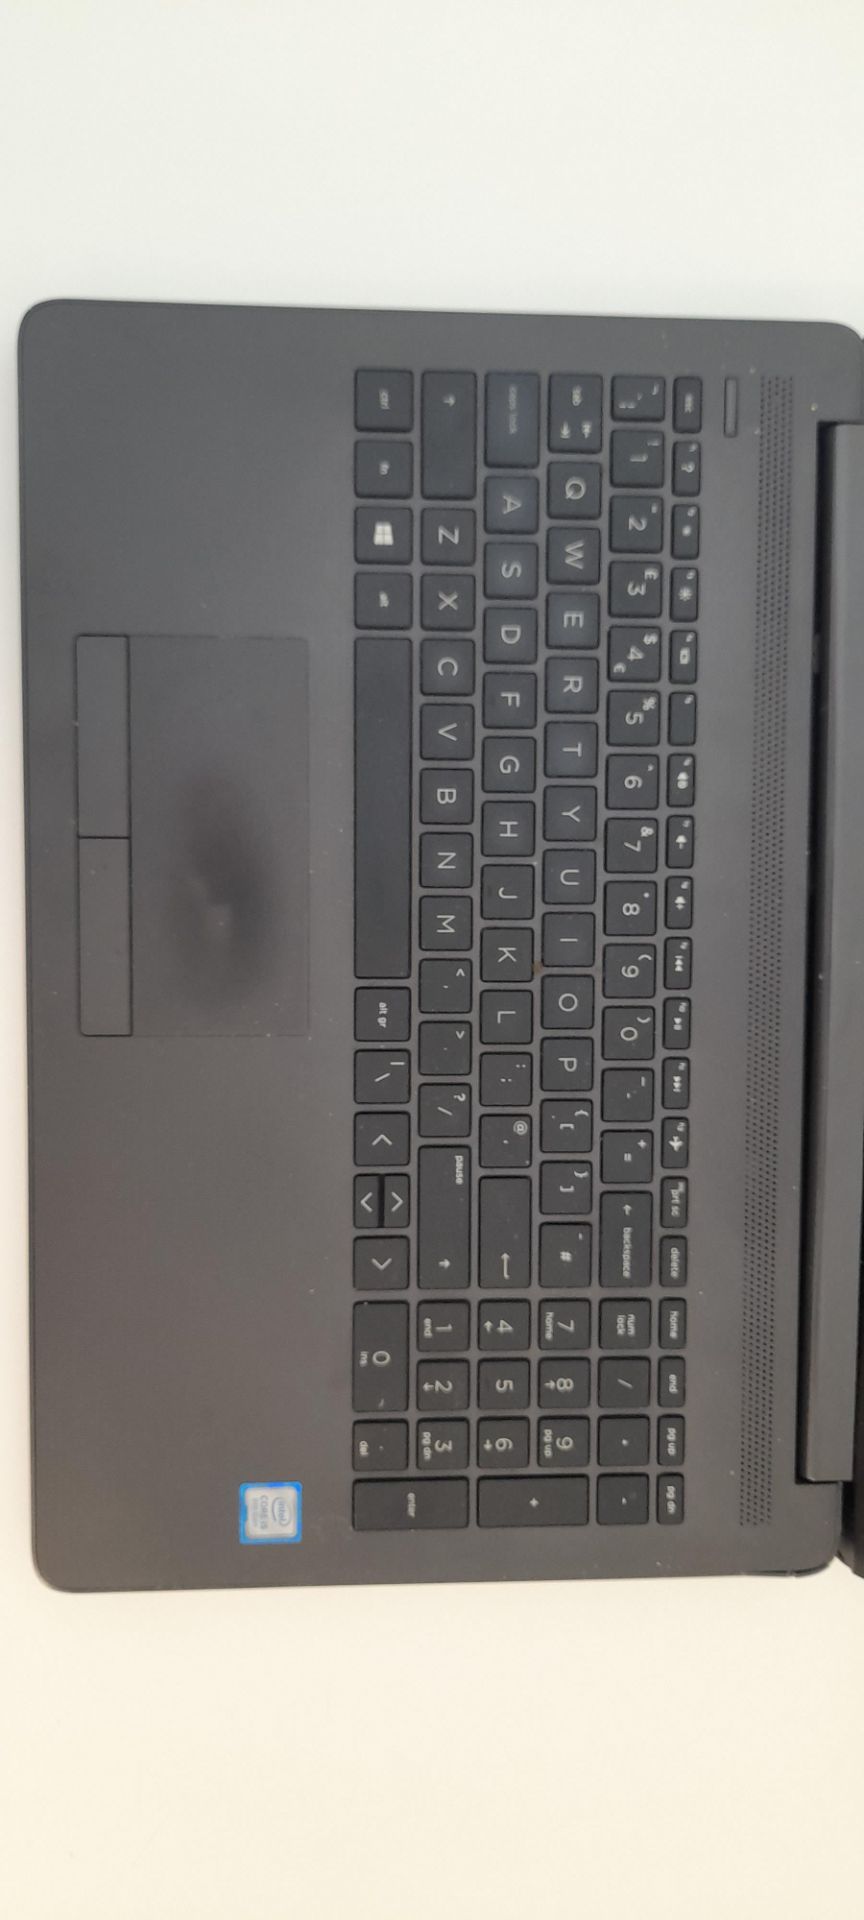 2x HP G250 G7 laptop with intel Core i5, 8th Gen. Collection from Canary Wharf, London, E14 - Image 11 of 15